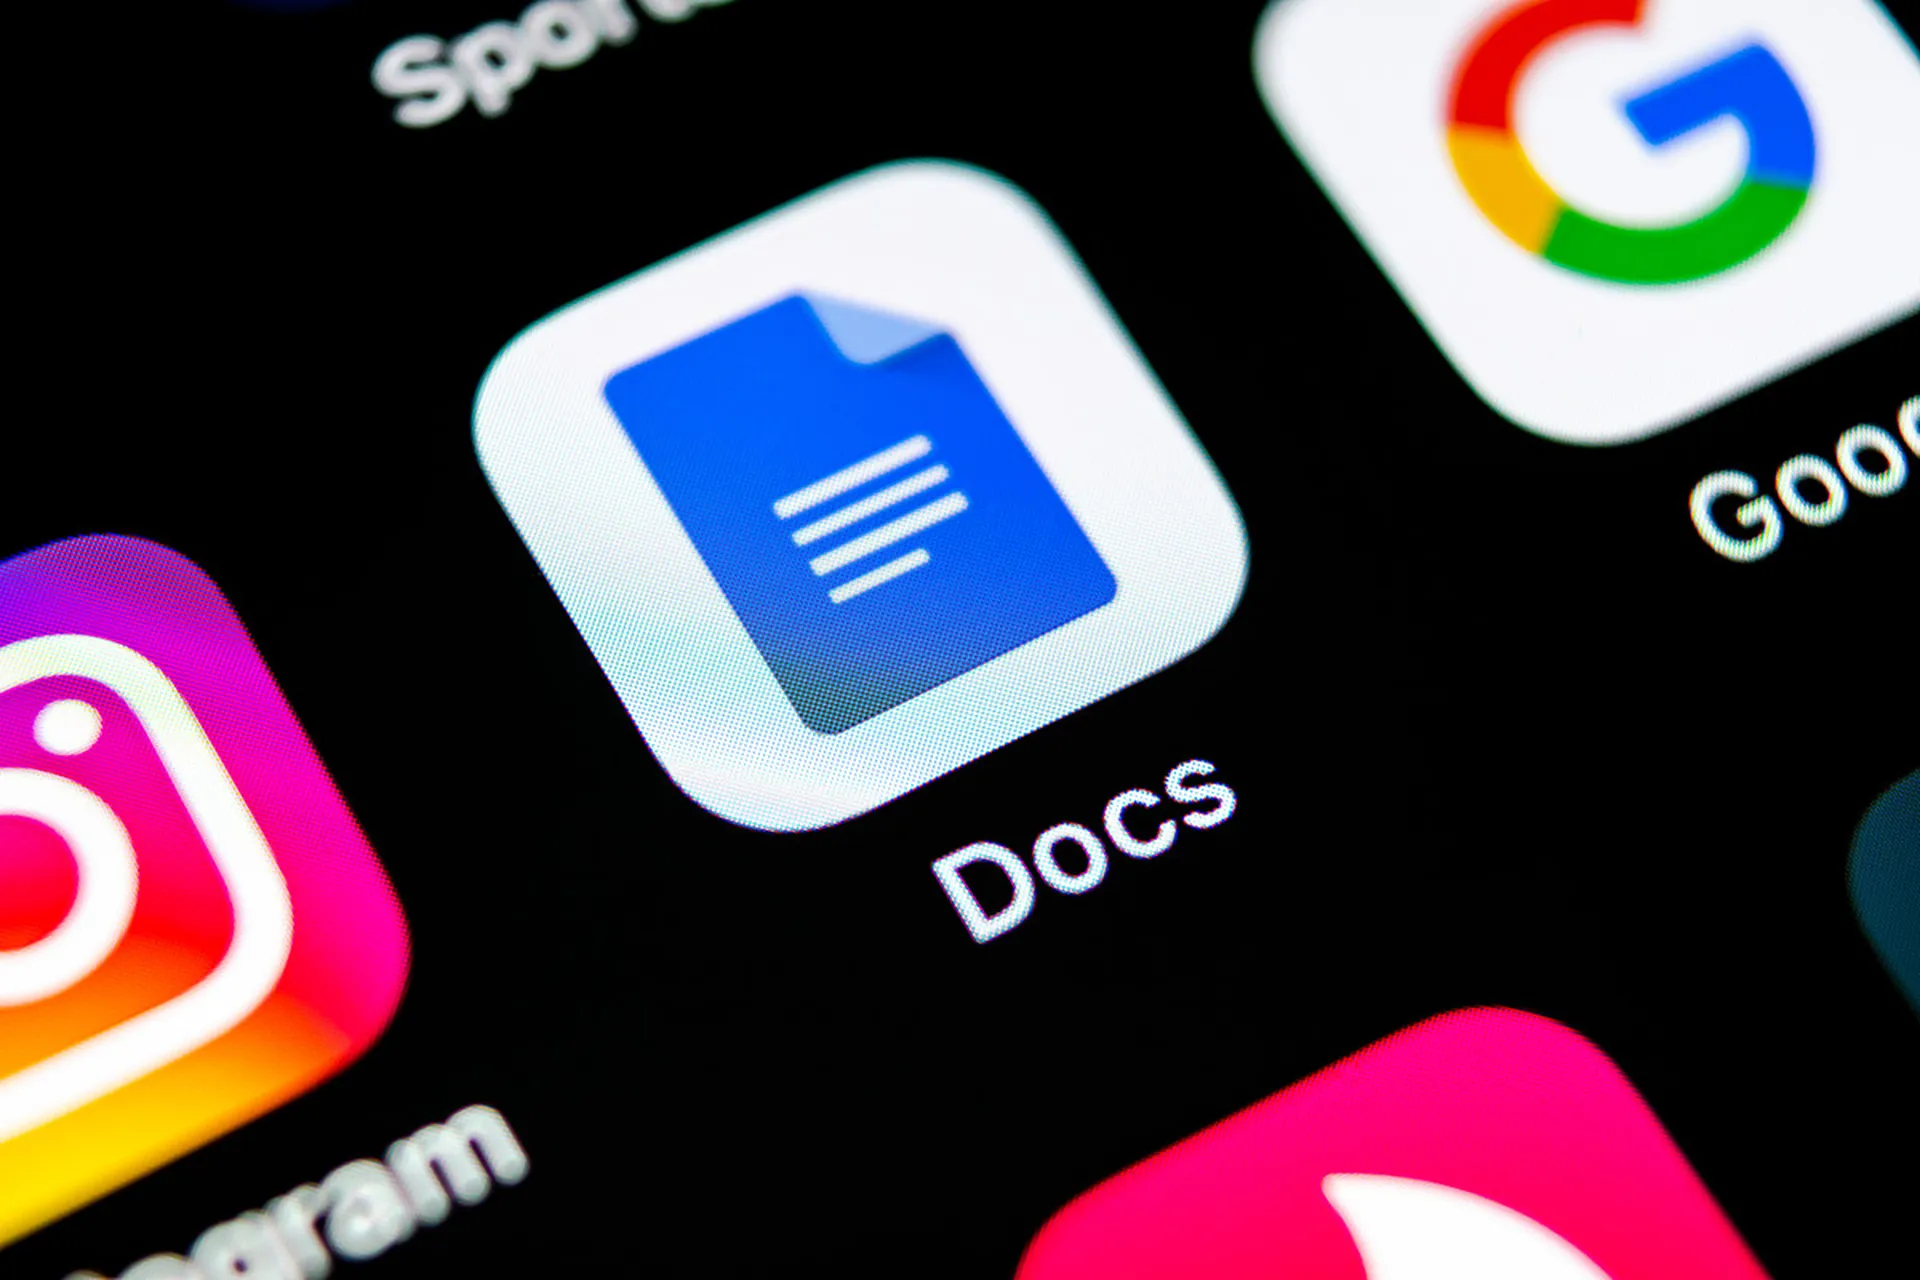 Google Docs icon seen close-up on a smartphone screen.